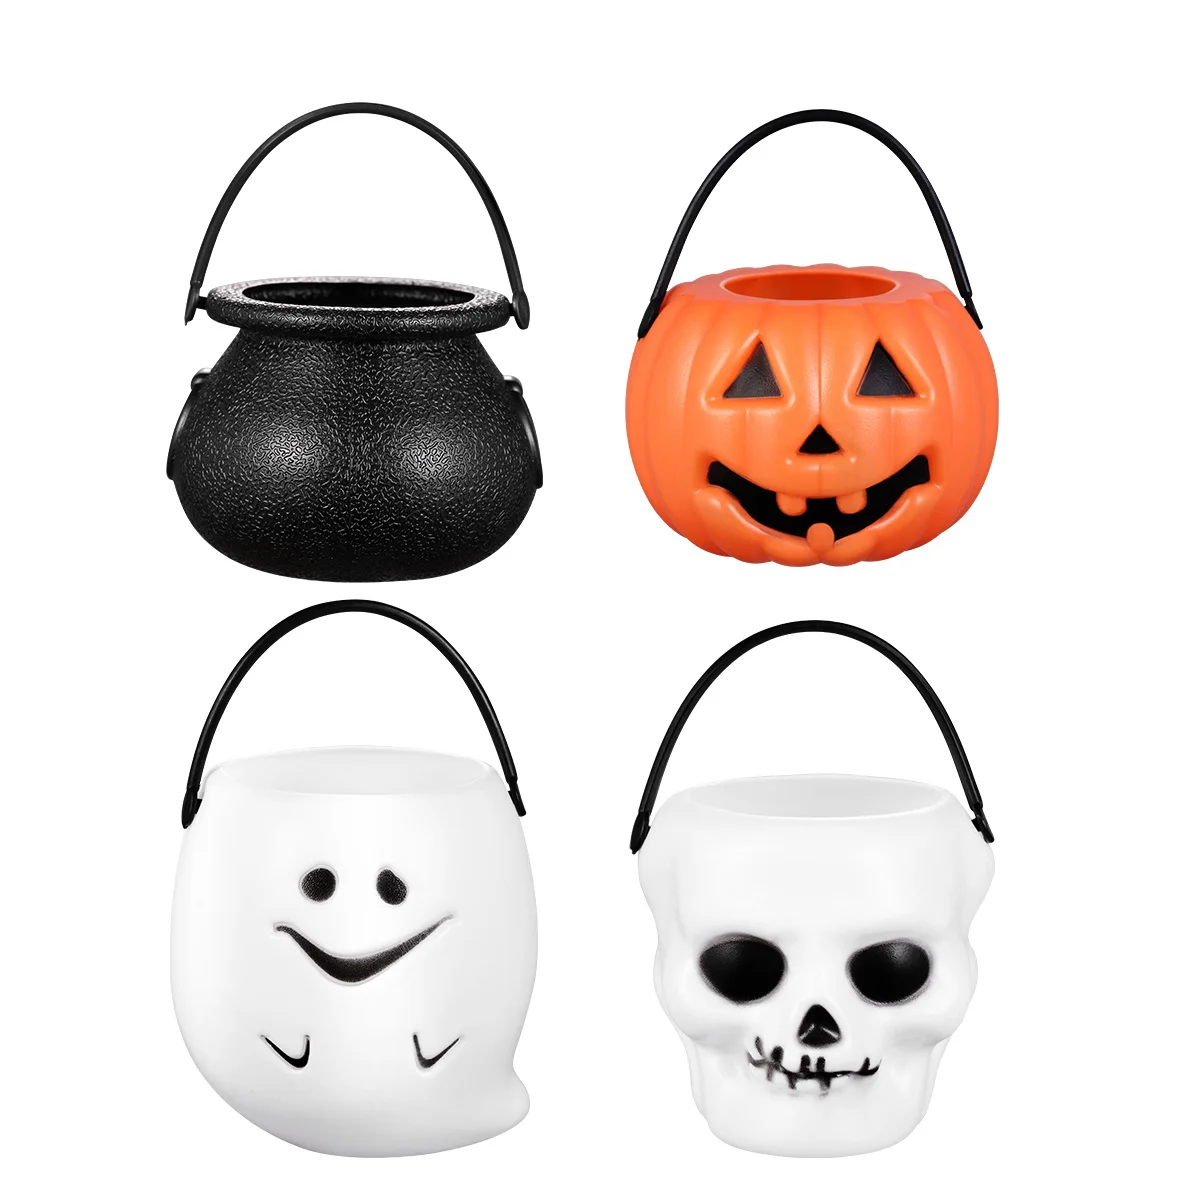 

Cabilock 12pcs Halloween Candy Buckets Trick Or Treat Candy Pots Snack Buckets Party Favors Holder Witch cauldron